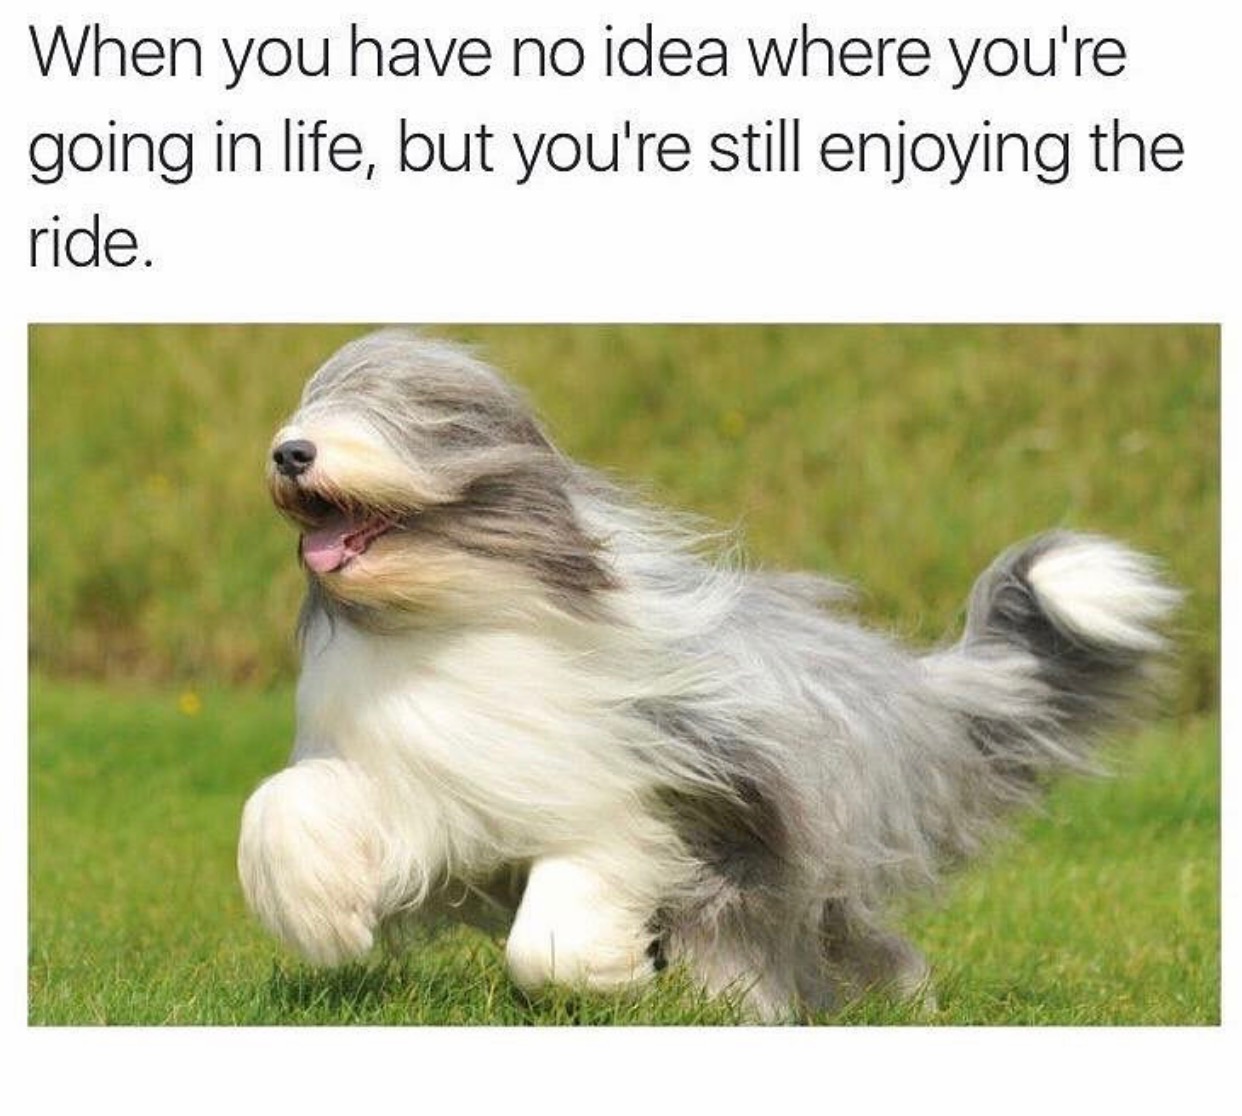 feel good memes - When you have no idea where you're going in life, but you're still enjoying the ride.